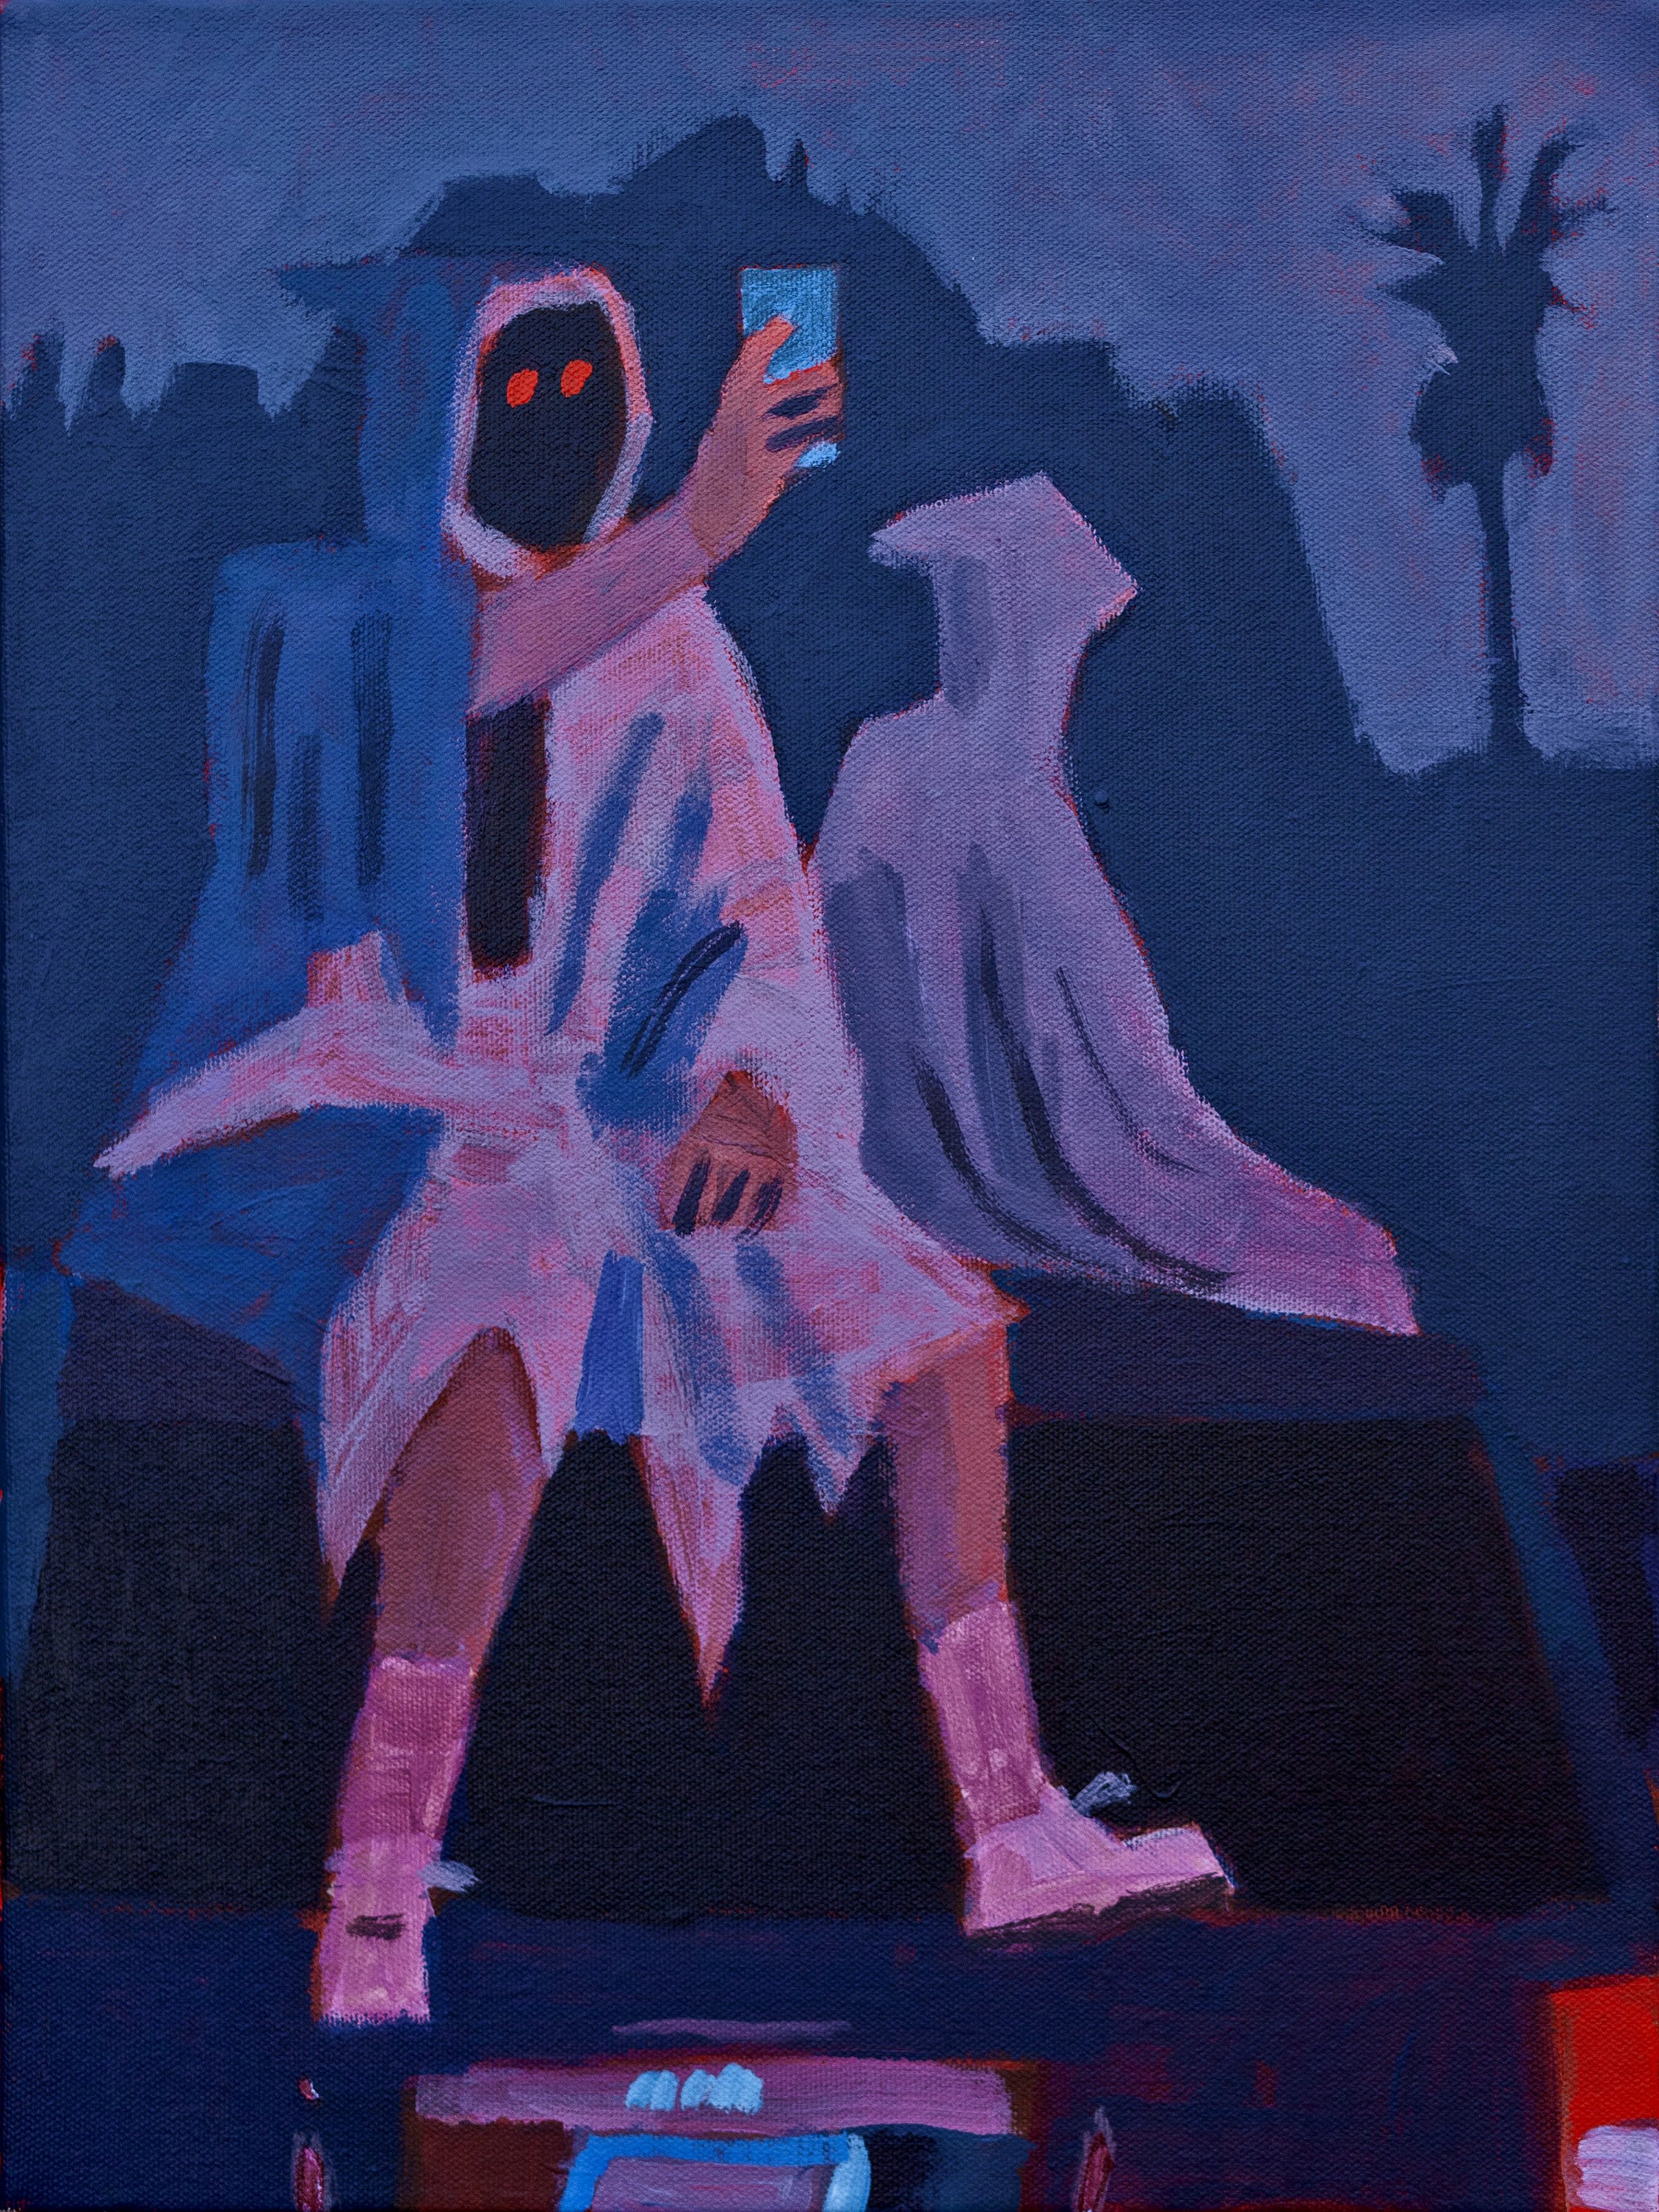 Woodrow White's painting of a hooded figure